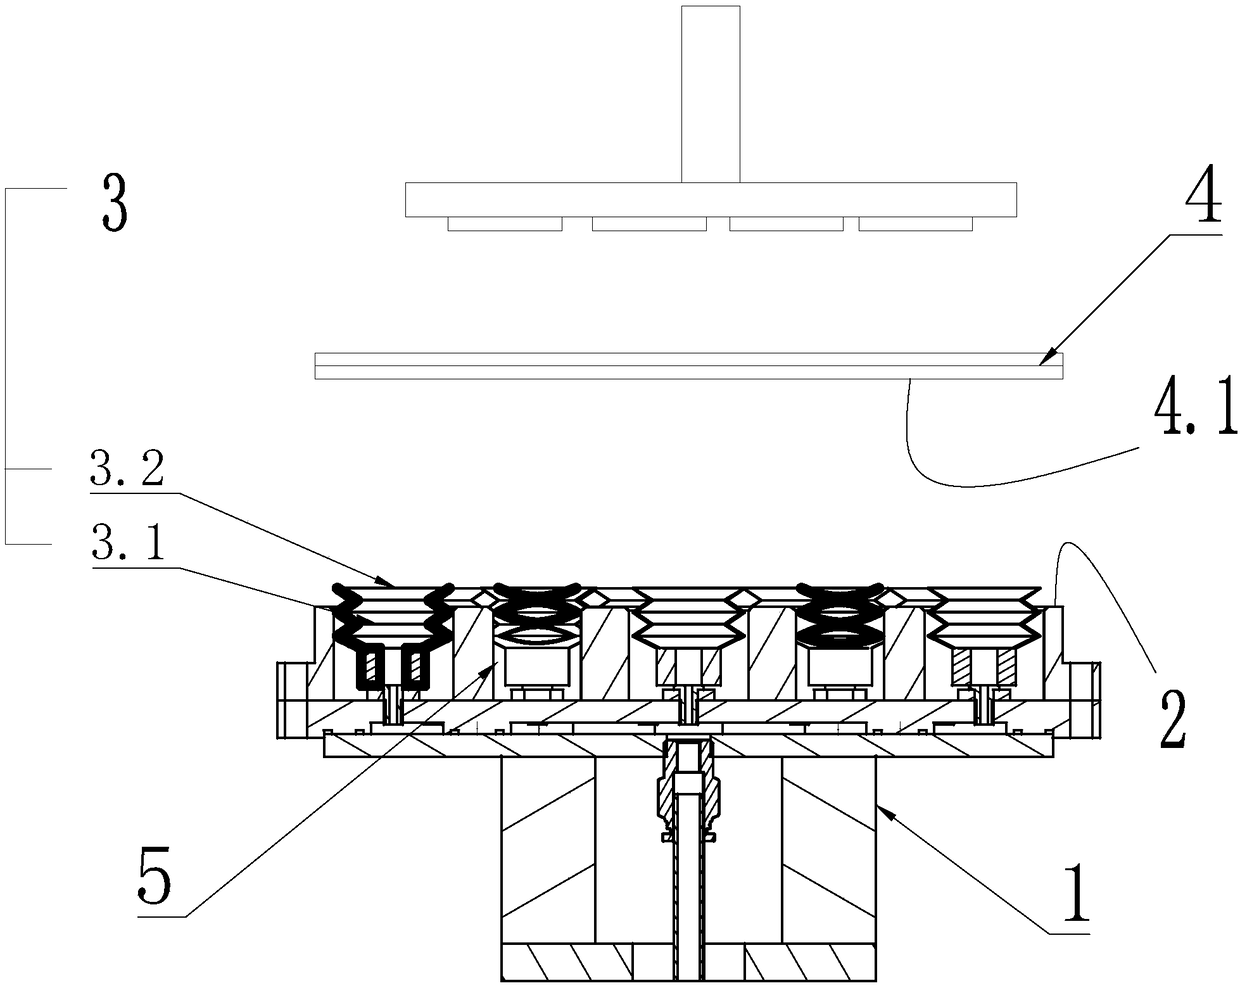 Workbench for de-bonding bonded sheet product and clamping method